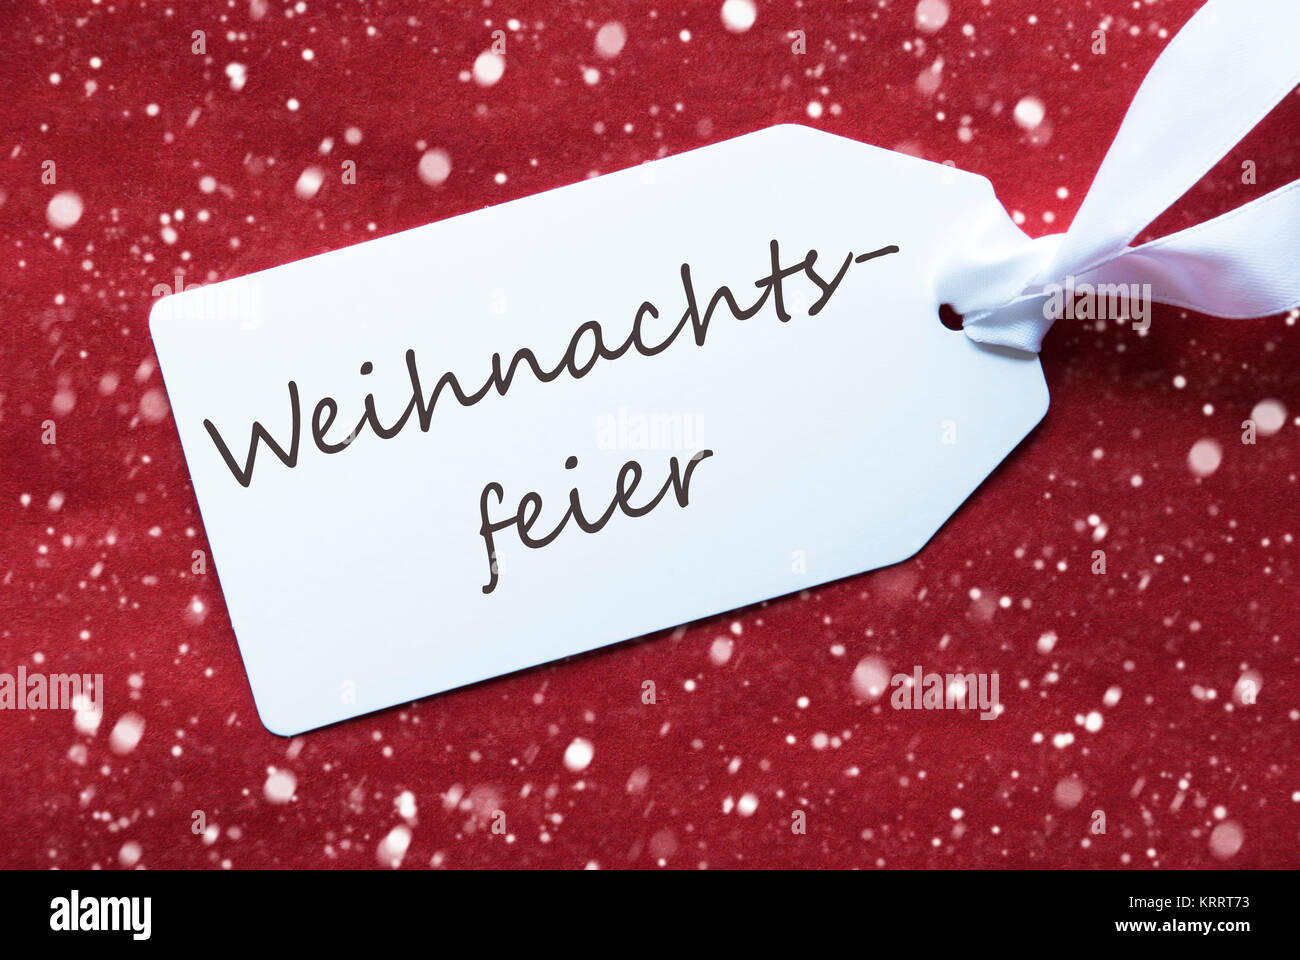 German Text Weihnachtsfeier Means Christmas Party. One White Label On A Red Textured Background. Tag With Ribbon And Snowflakes. Stock Photo